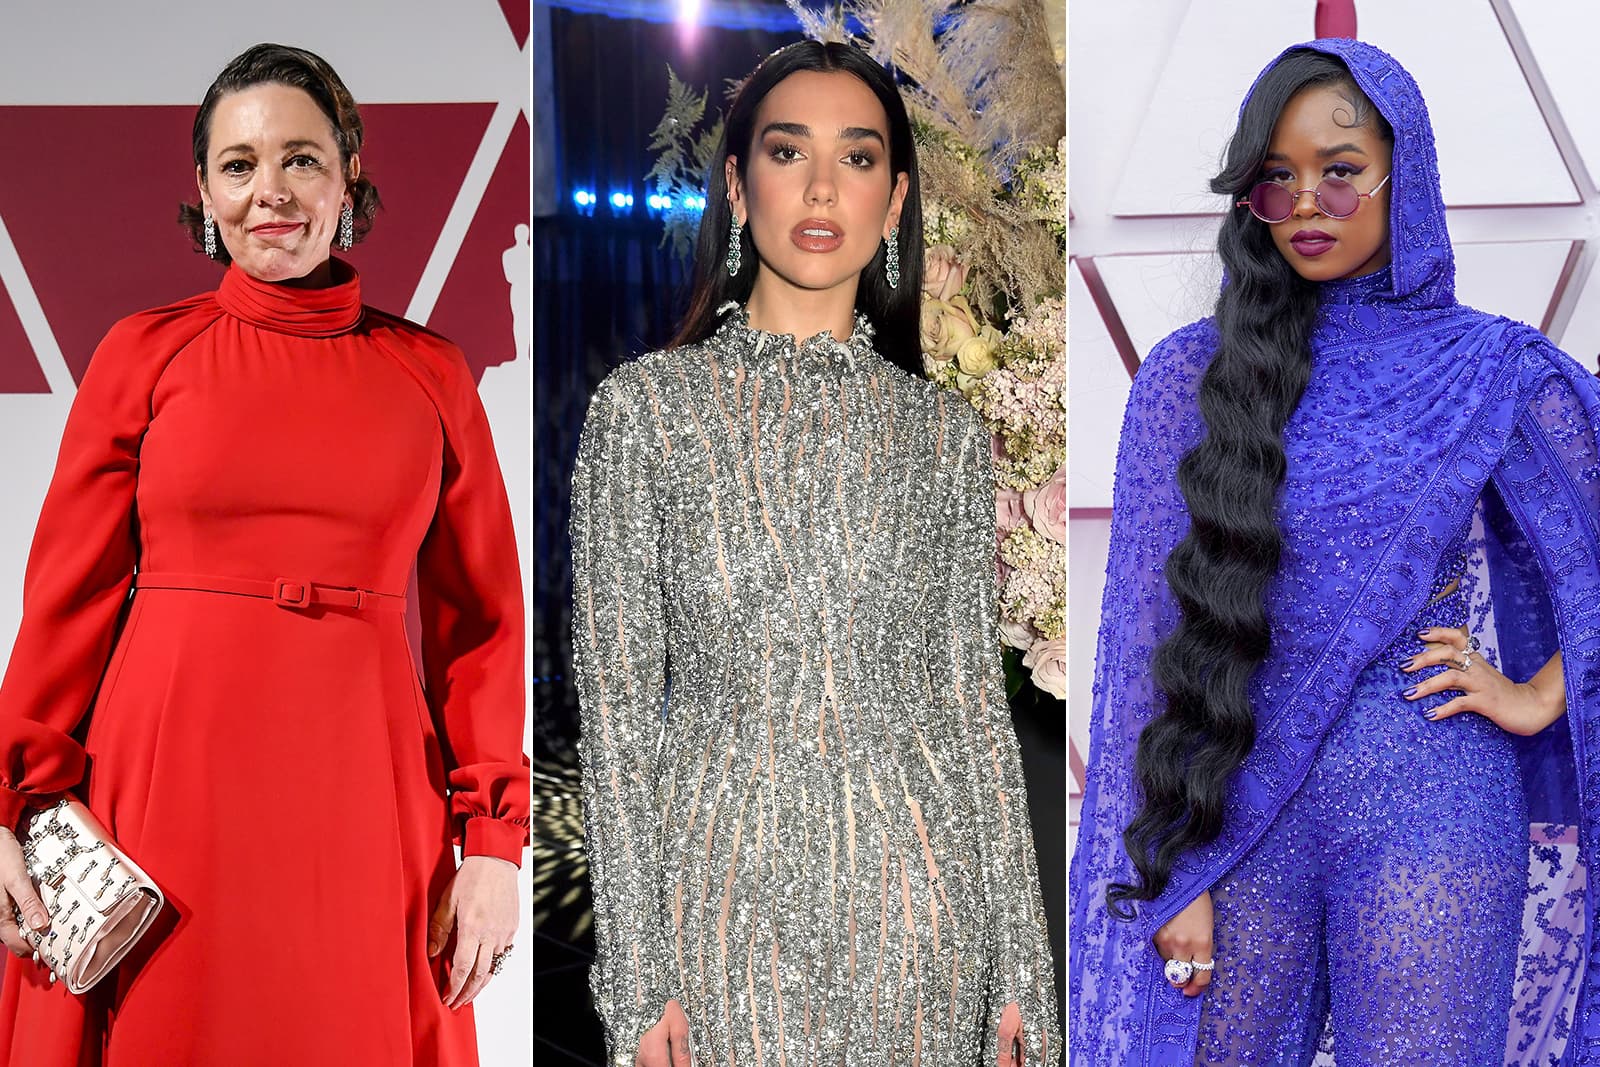 Olivia Colman and H.E.R wore Chopard diamond jewels to the 93rd Annual Academy Awards, while Dua Lipa chose the maison for her appearance at Elton John’s AIDS Foundation Oscar party